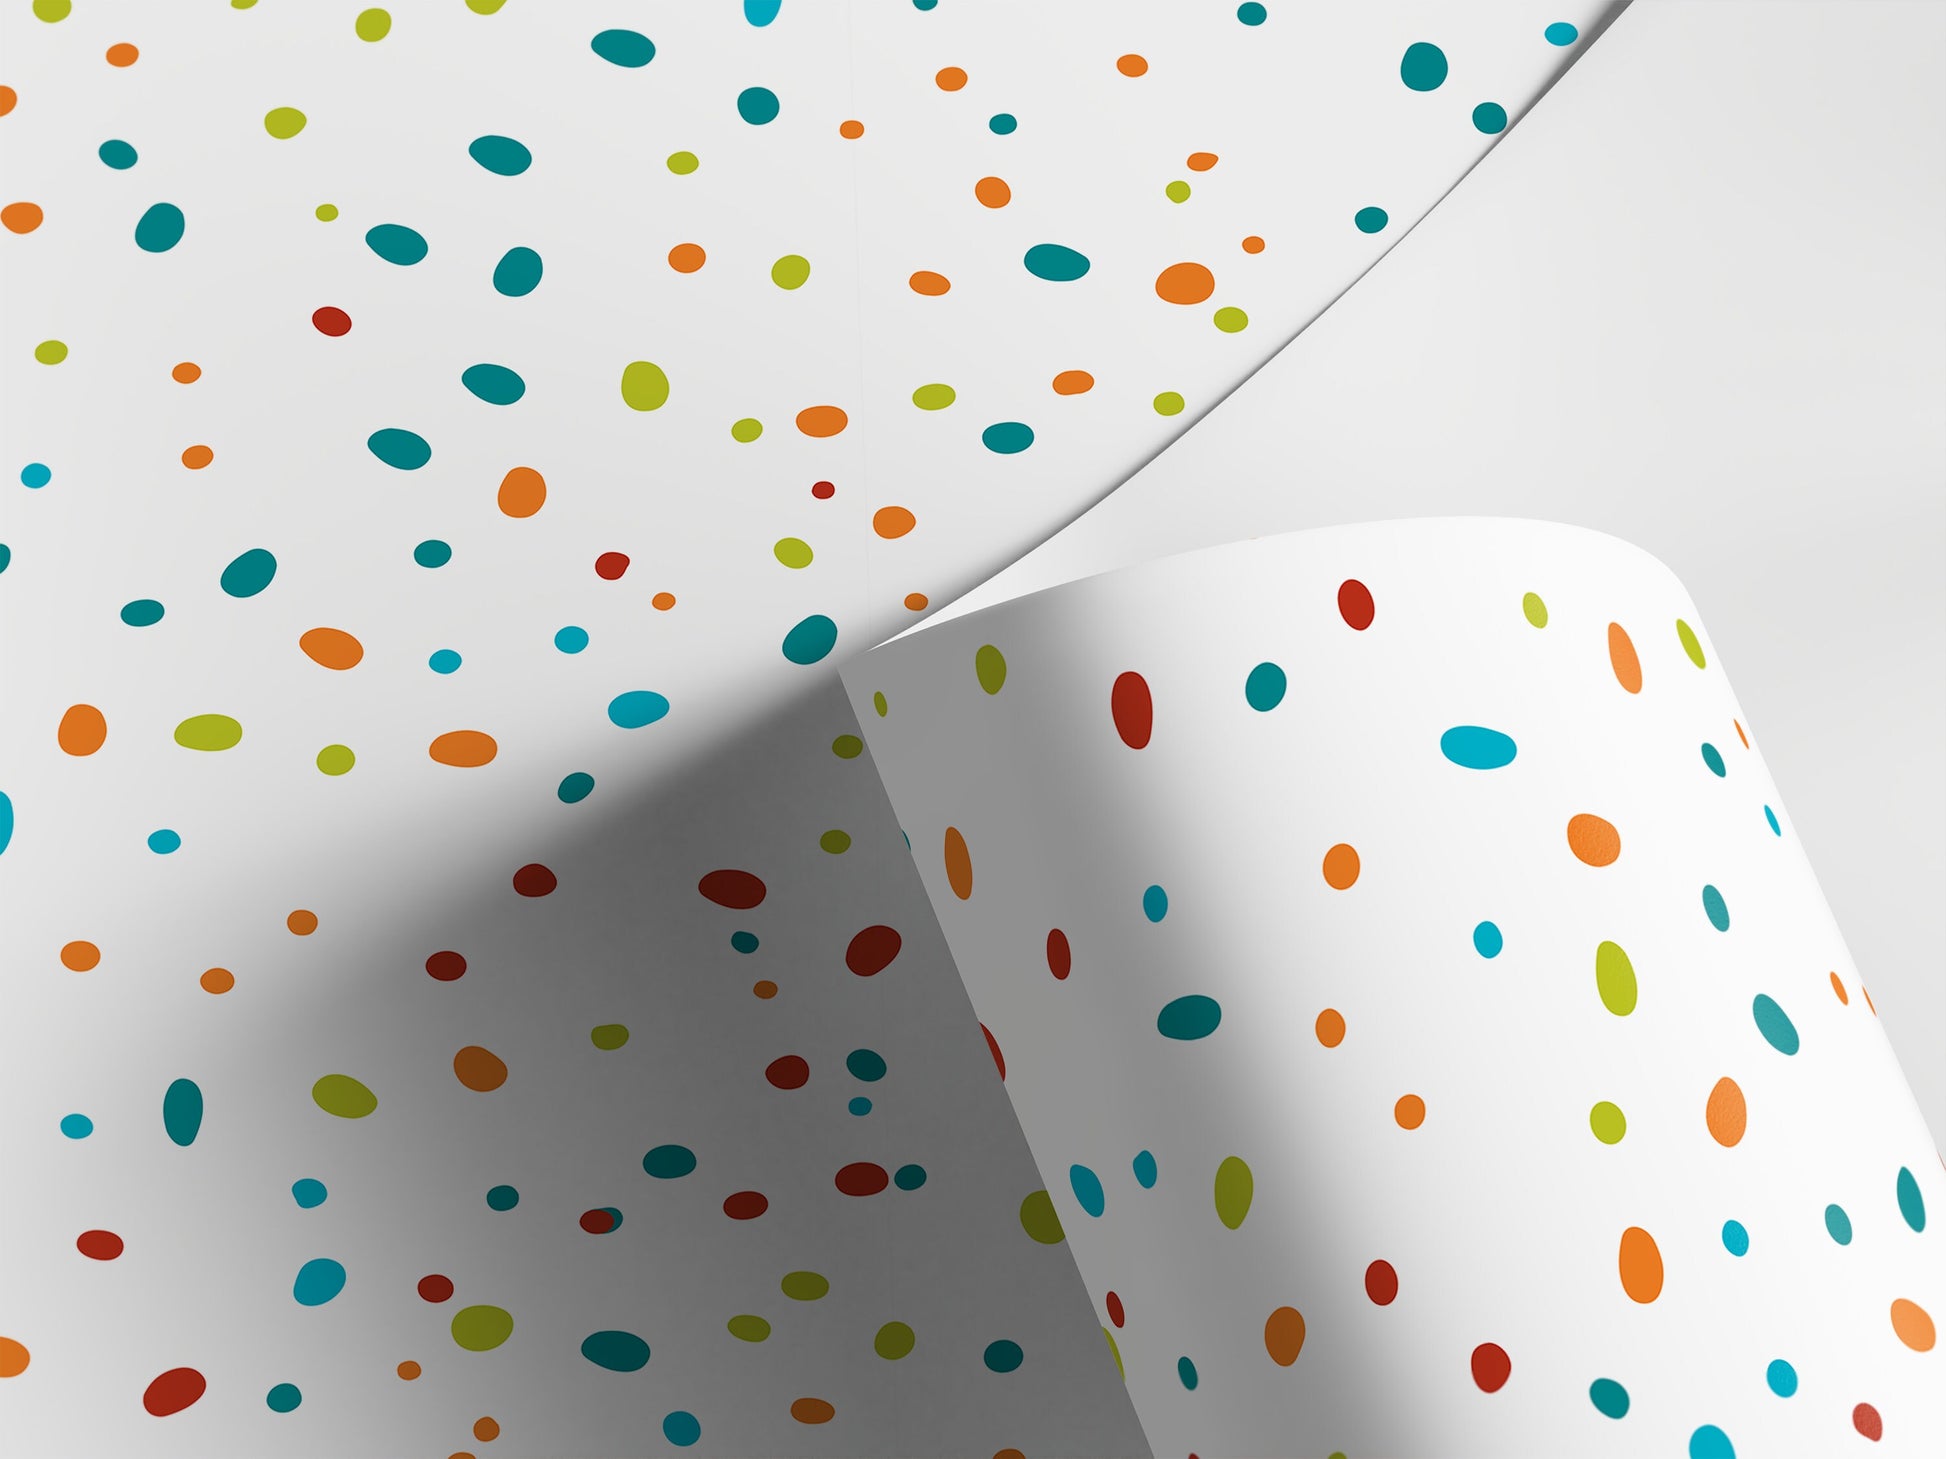 Removable Wallpaper Peel and Stick Wallpaper Wall Paper - Colorful Dots Wallpaper - B069